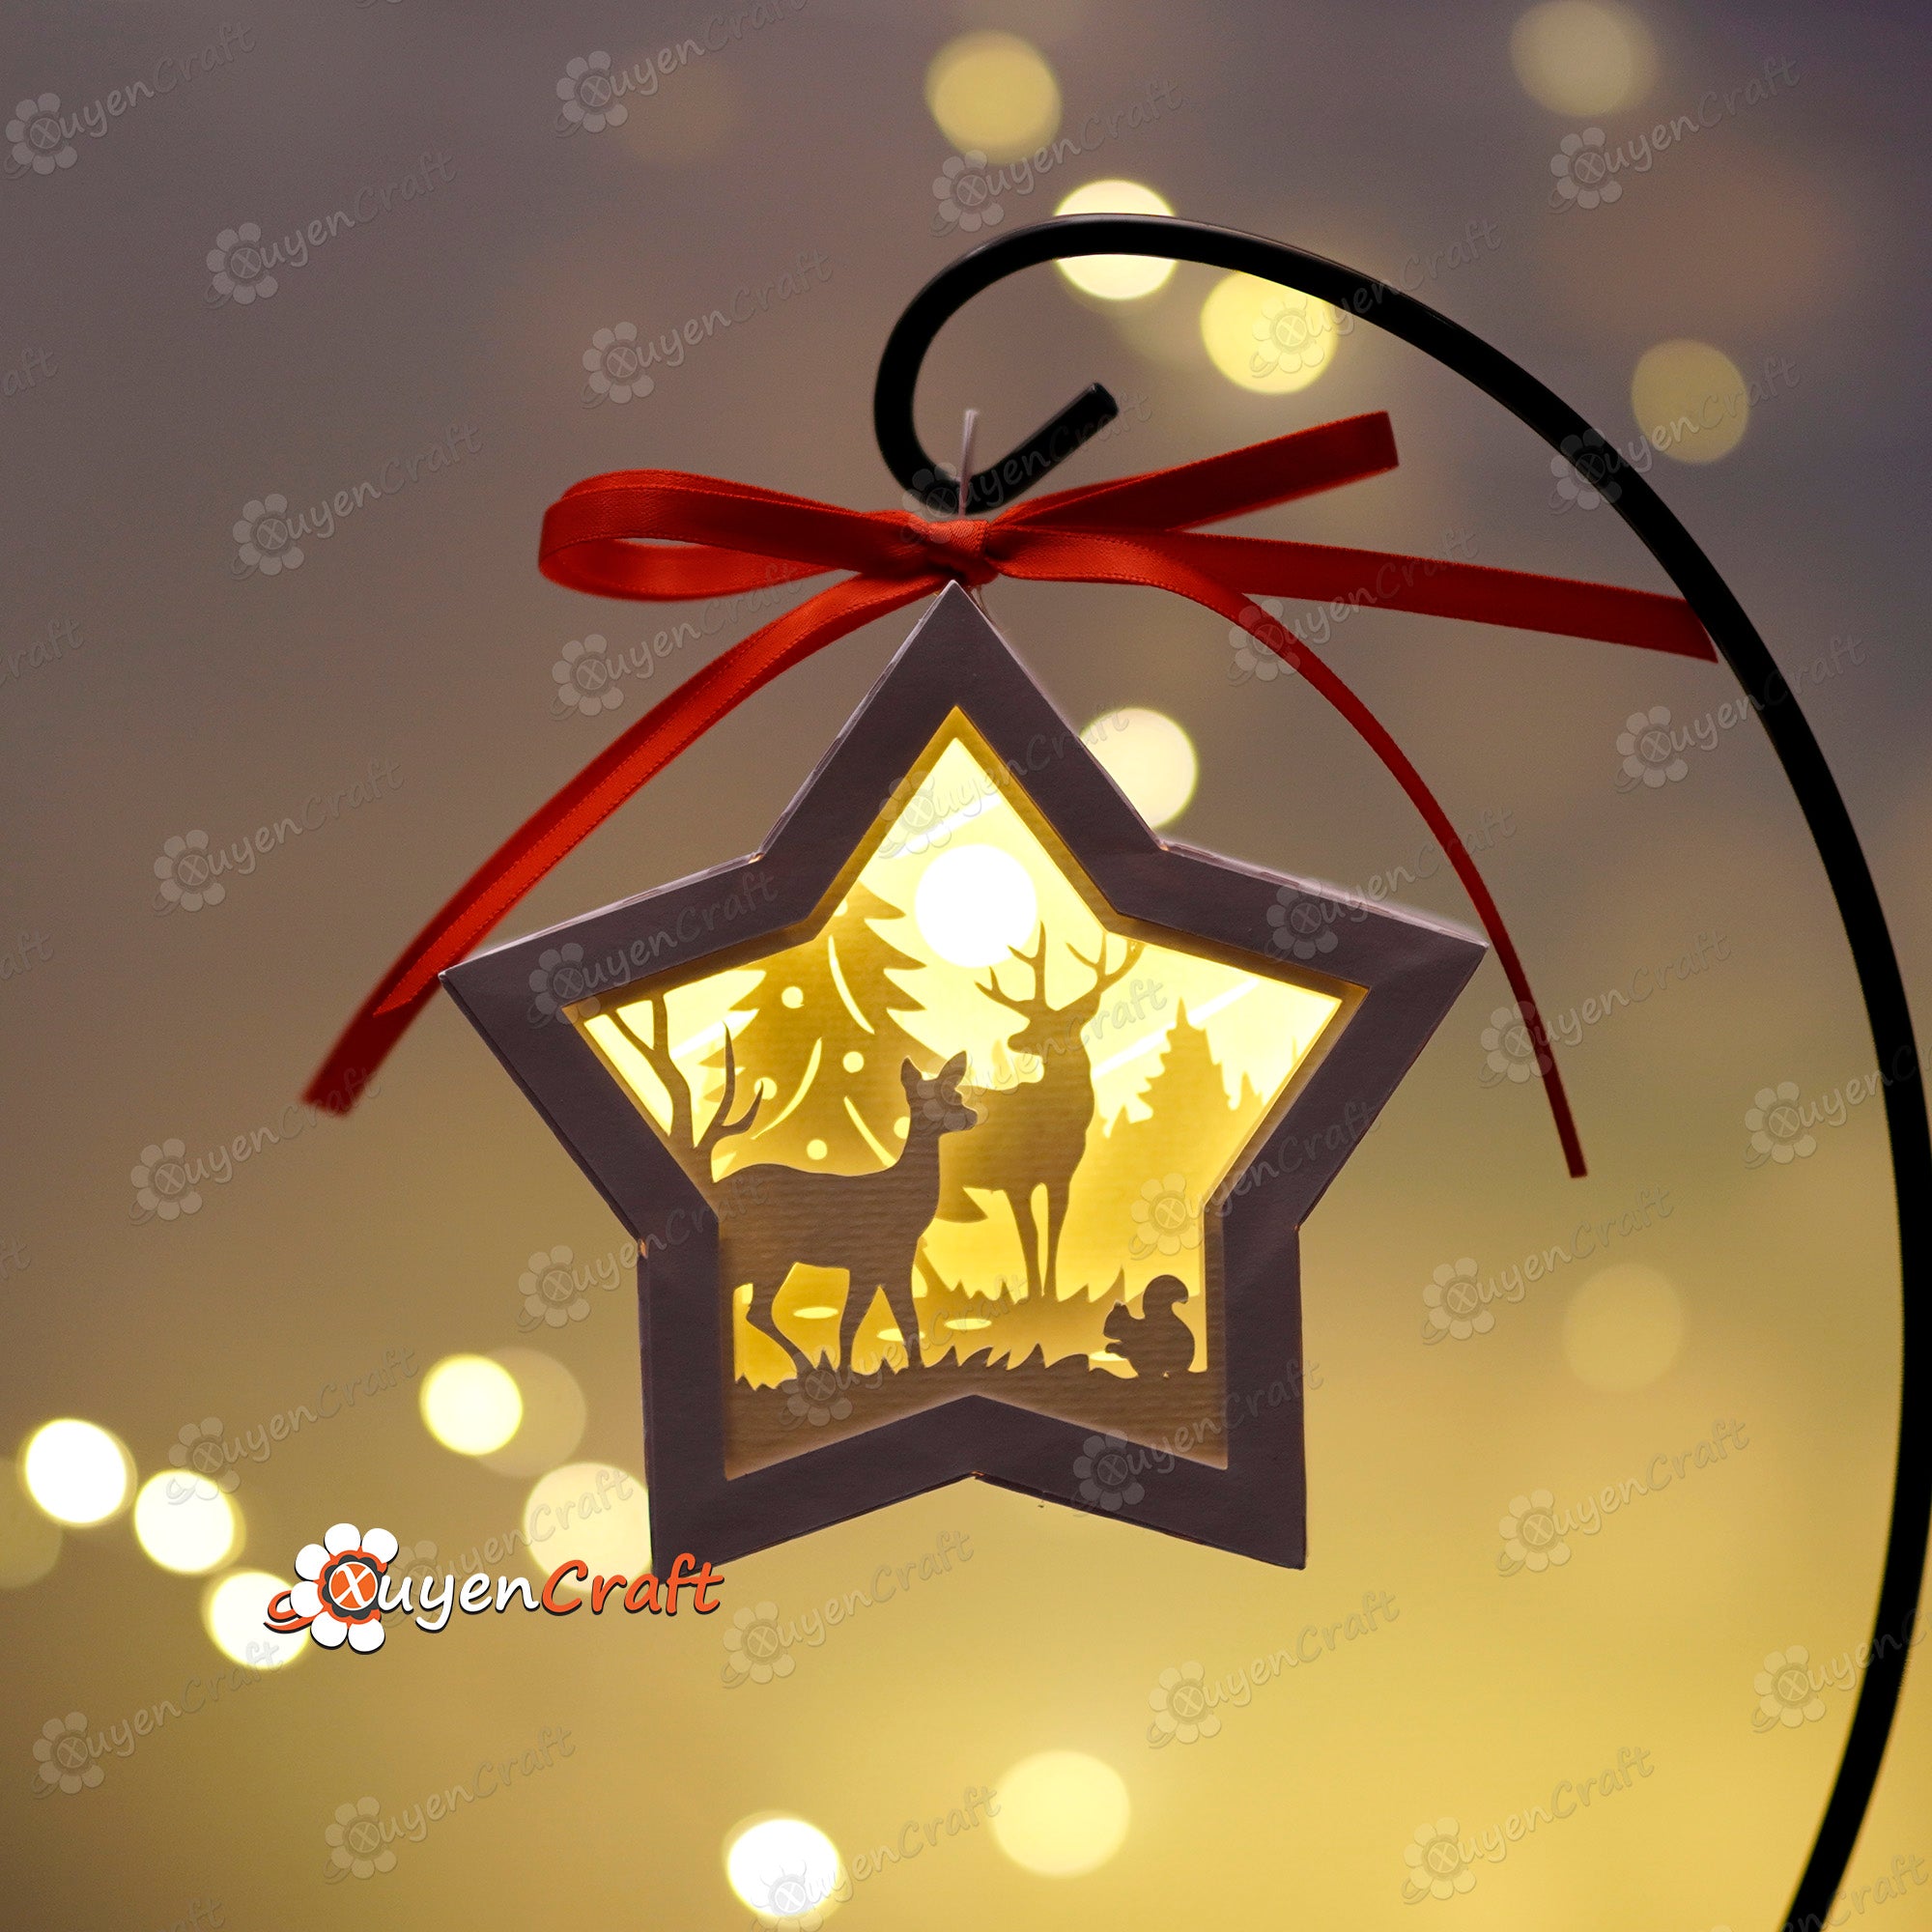 Pack 5 Christmas Small Star Ornaments SVG for Cricut Joy, ScanNcut, Cameo - Merry Christmas Hanging Star Lantern Shadow Box SVG Template